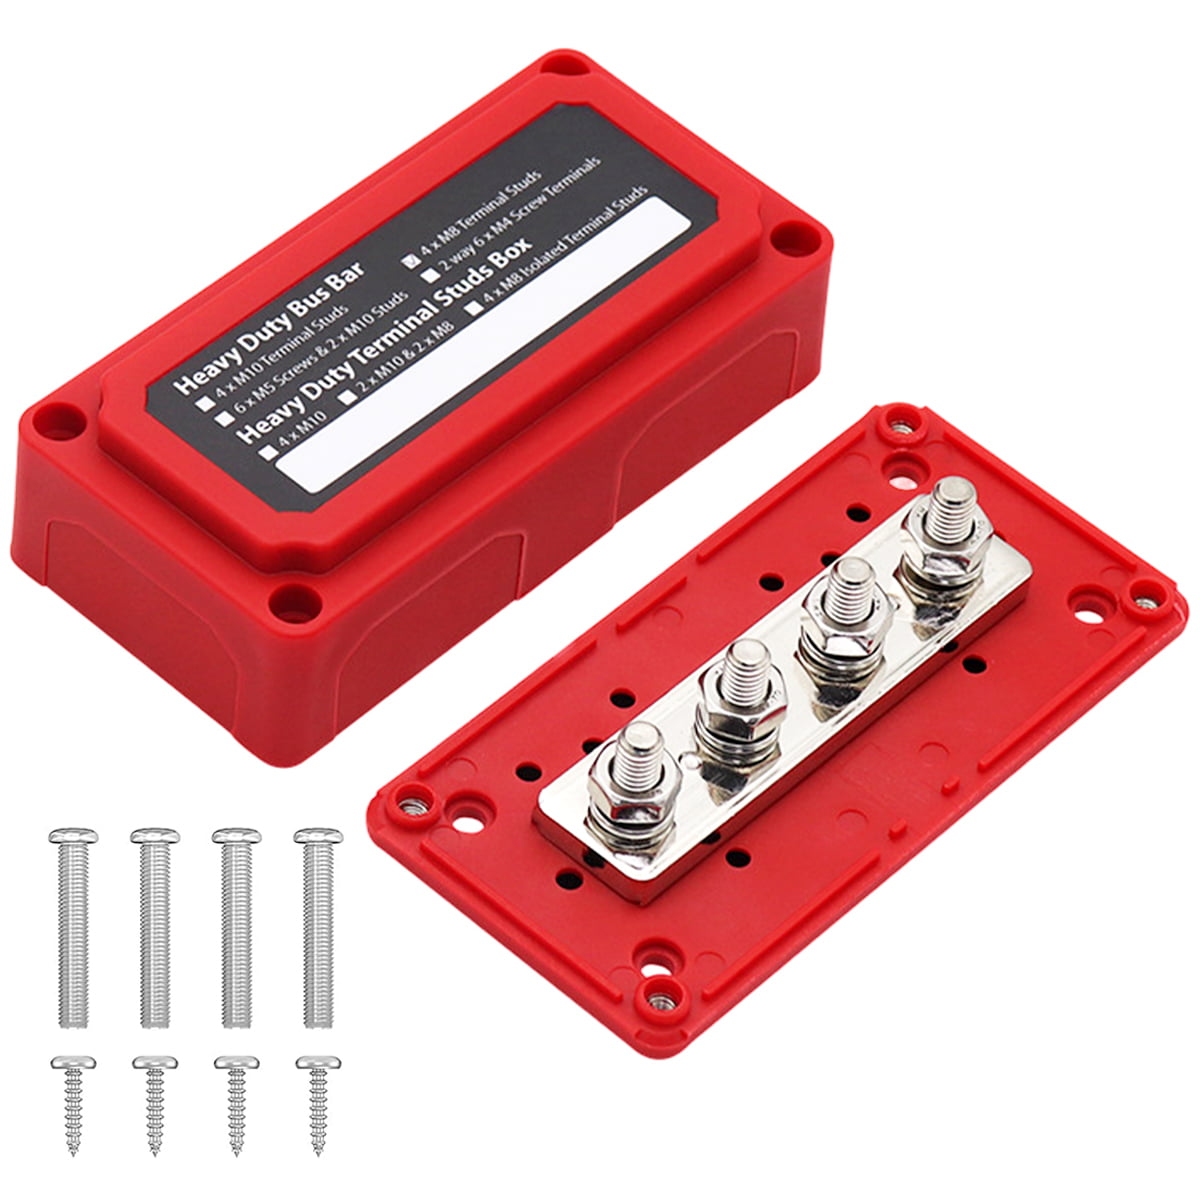 verlacod Bus Bar Terminal Block DC 12V-48V 300A Professional Power  Distribution Block Bus Bar with 4 M8 Terminal Studs Heavy Duty Battery  Junction Block with Cover for Car RV,Black+Red 